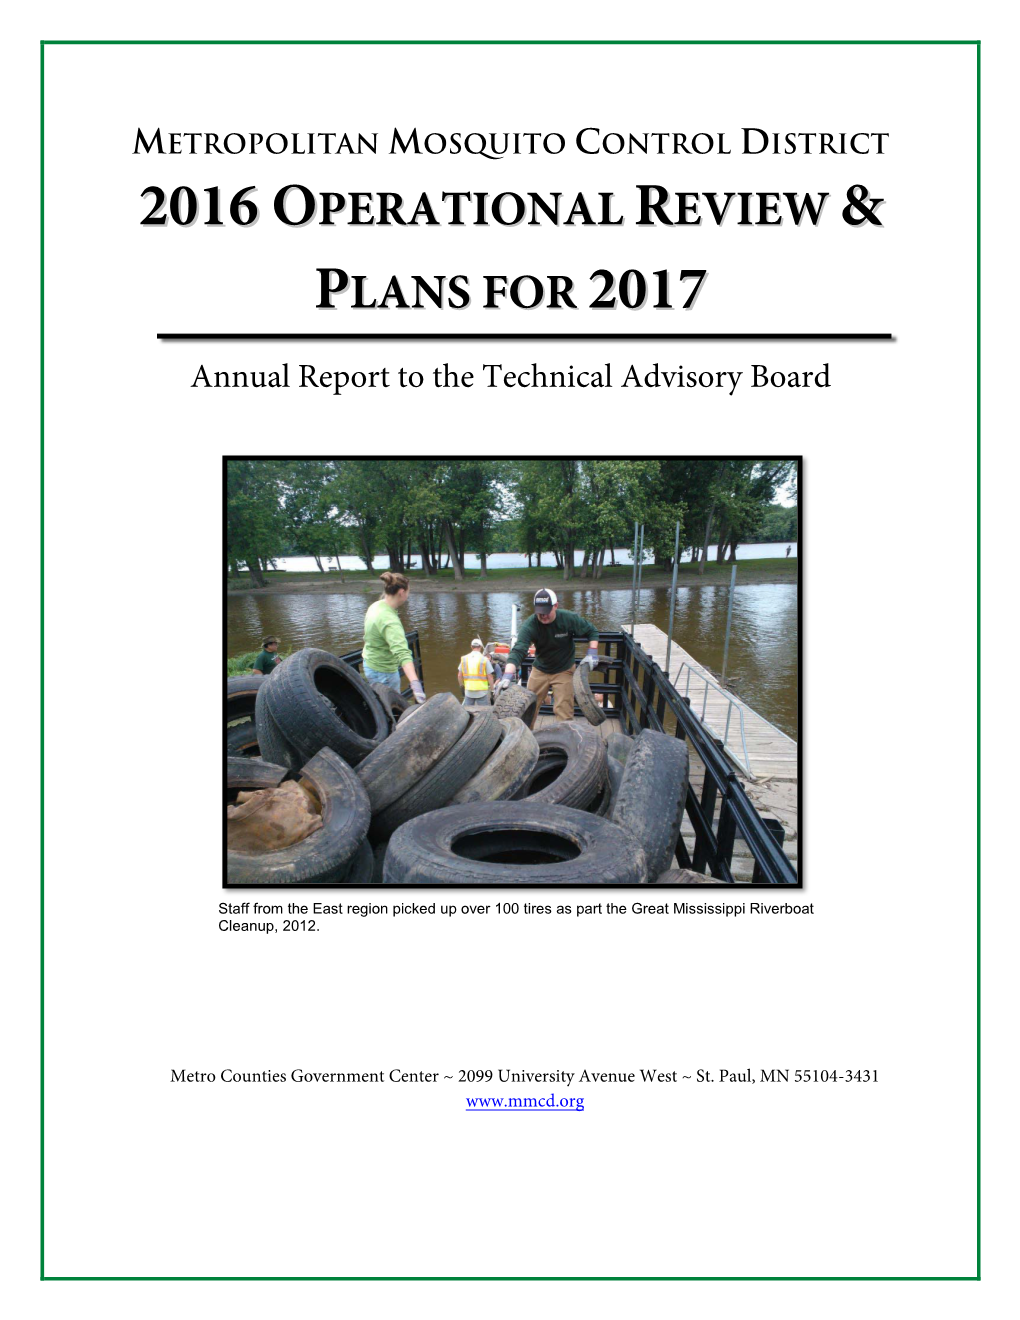 2016 Operational Review